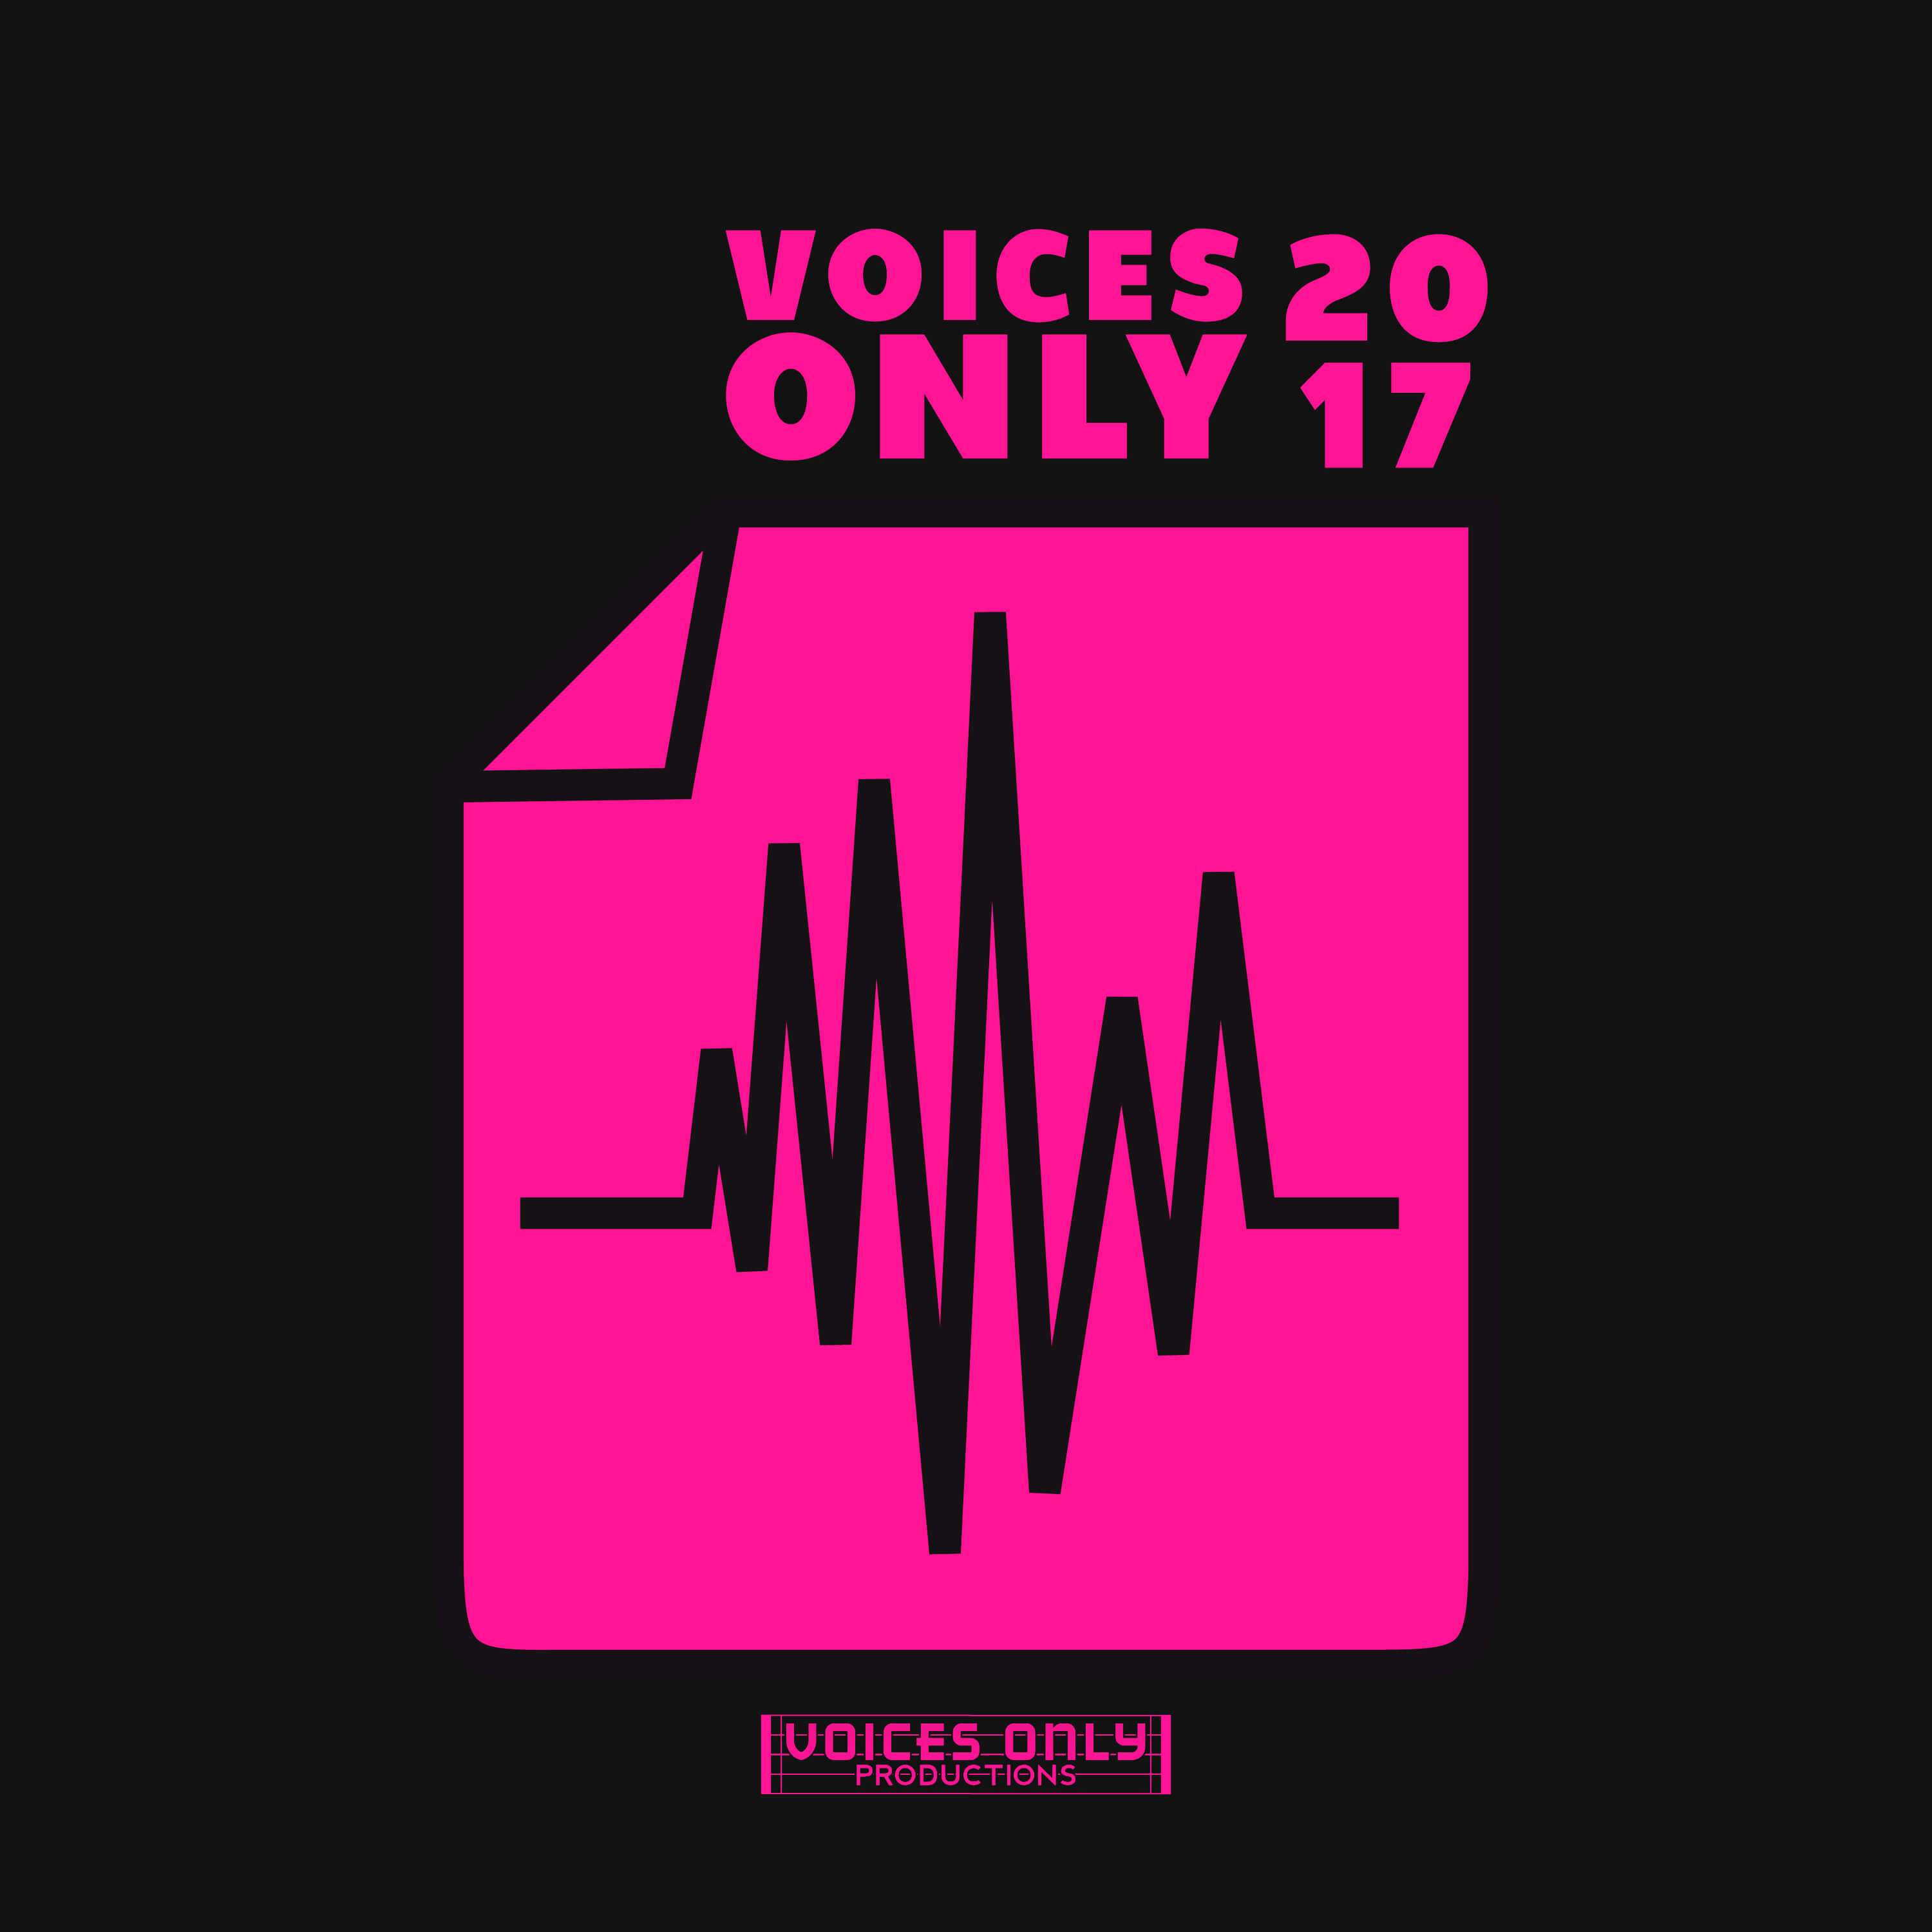 Download Voices Only 2017 now